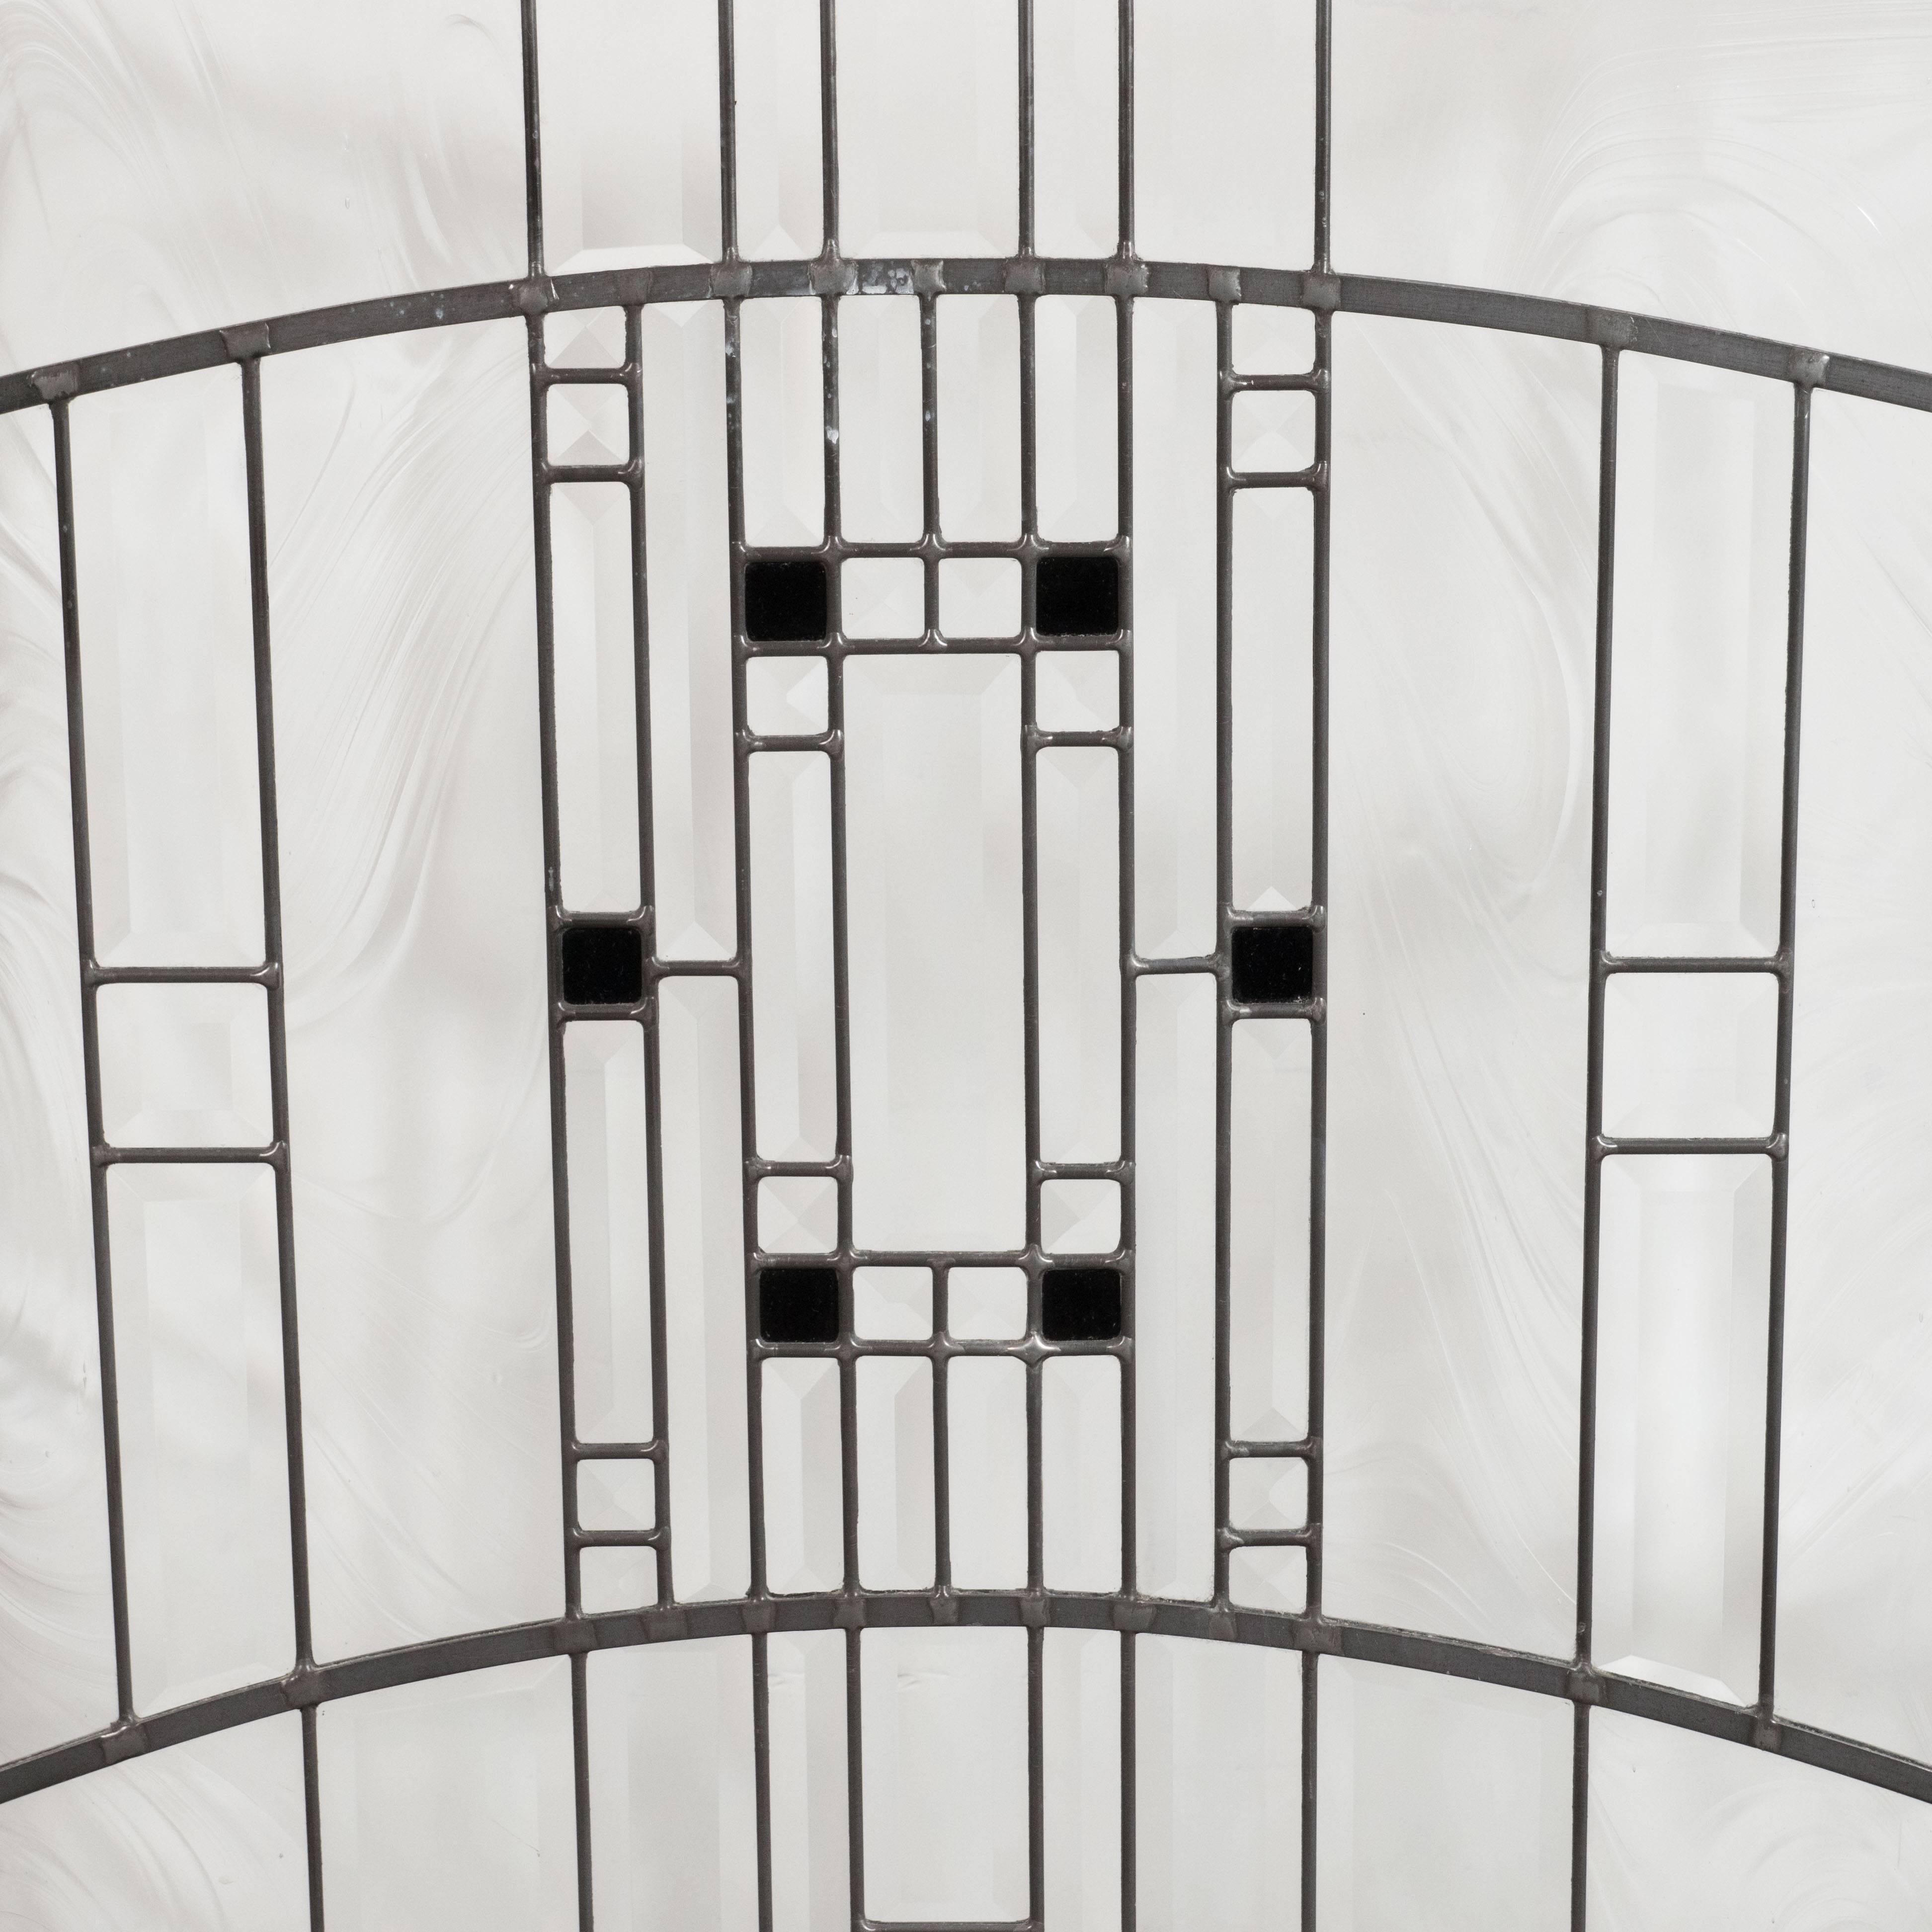 This elegant and refined firescreen represents a design produced by the legendary architect and visionary Frank Lloyd Wright. It features streamlined forms intersected by an abundance of vertical and horizontal lines, creating a wealth of beveled